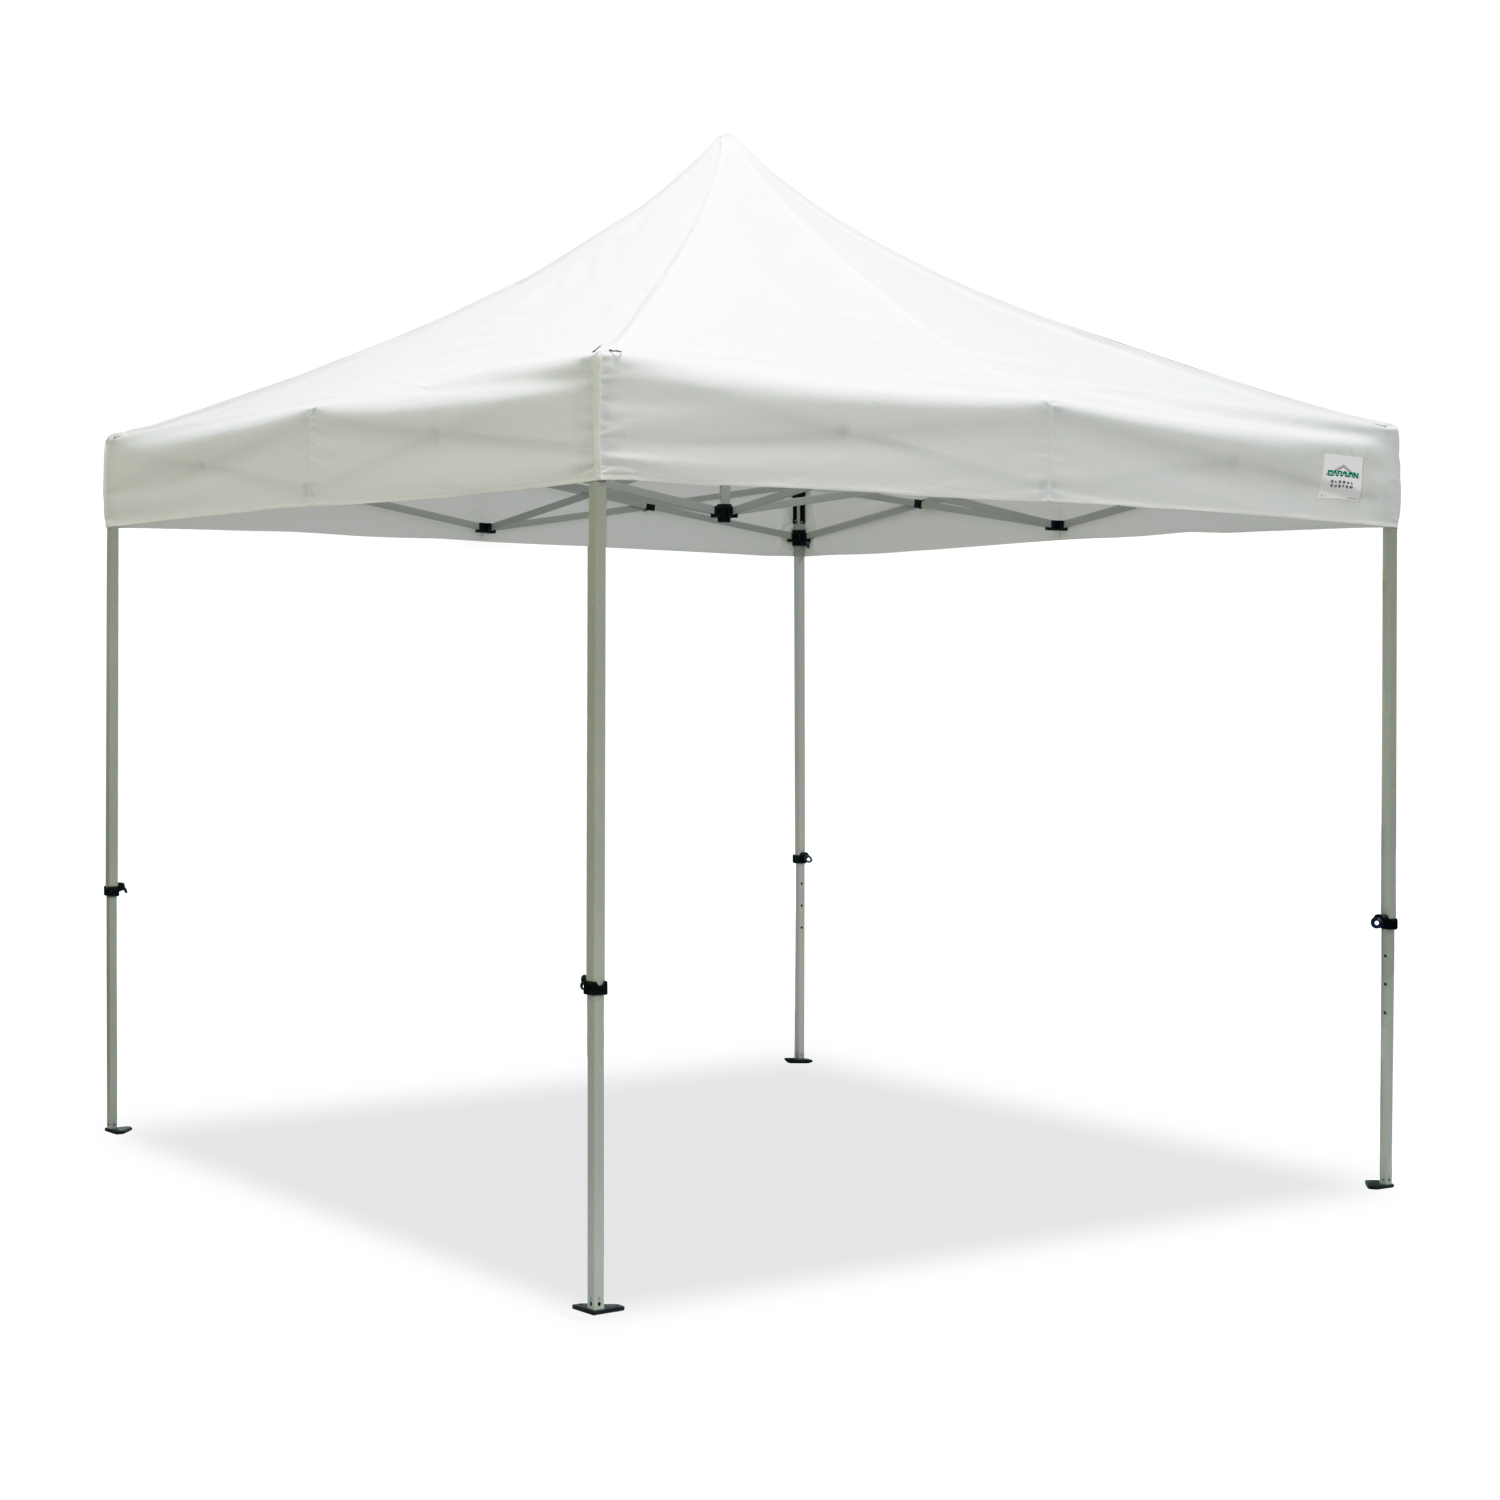 Details about   Canopy Tent Straight Leg Instant Gazebo 10x10" Heavy-Duty Outdoor Camping 